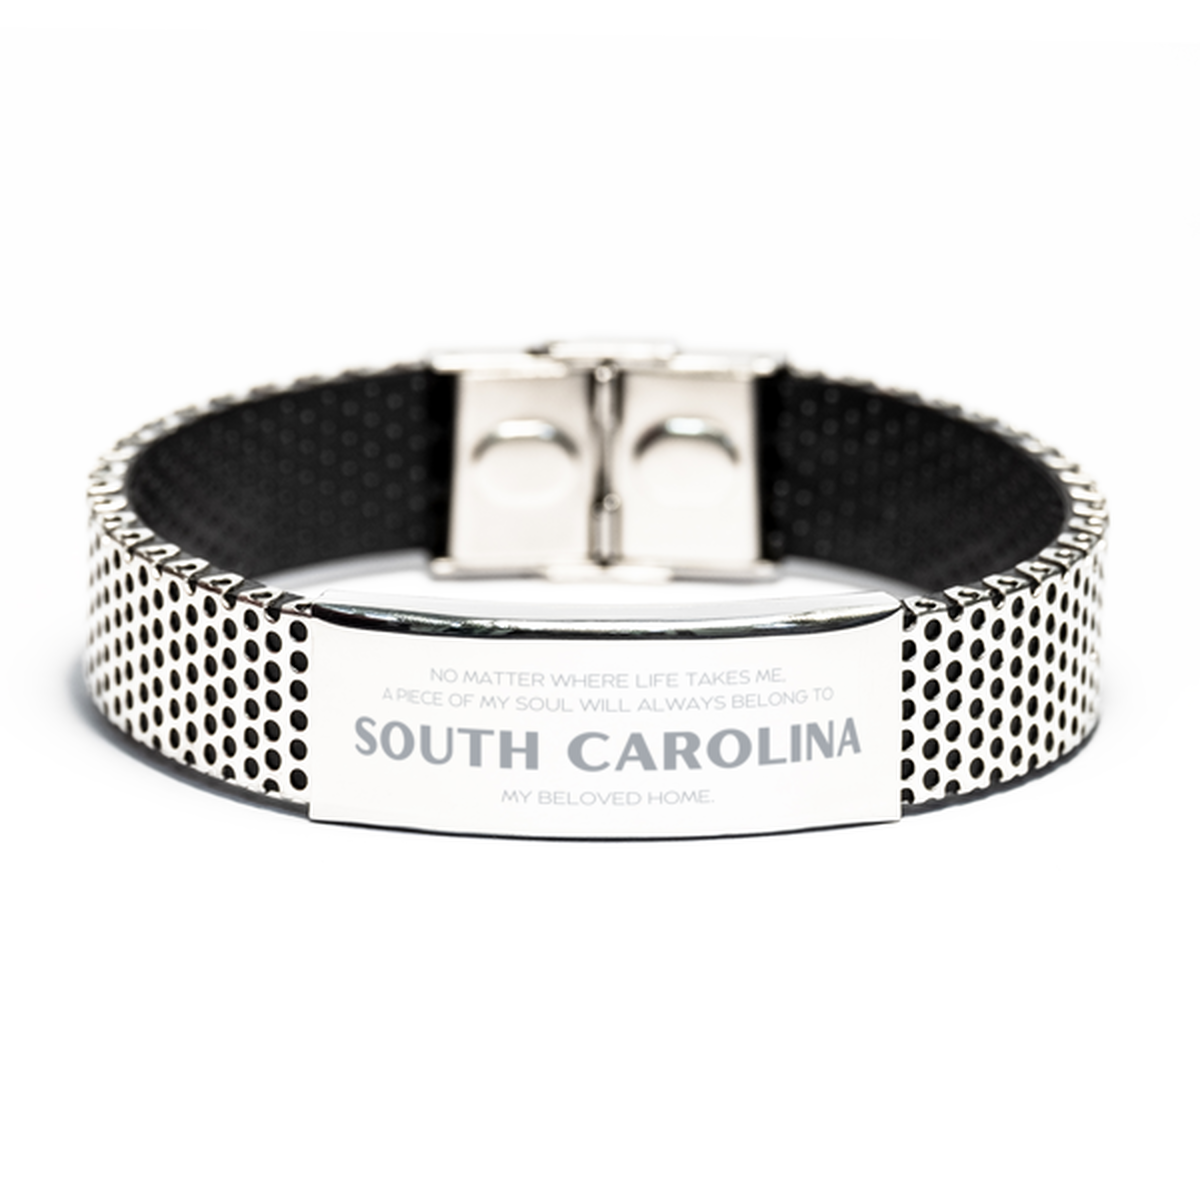 Love South Carolina State Gifts, My soul will always belong to South Carolina, Proud Stainless Steel Bracelet, Birthday Unique Gifts For South Carolina Men, Women, Friends